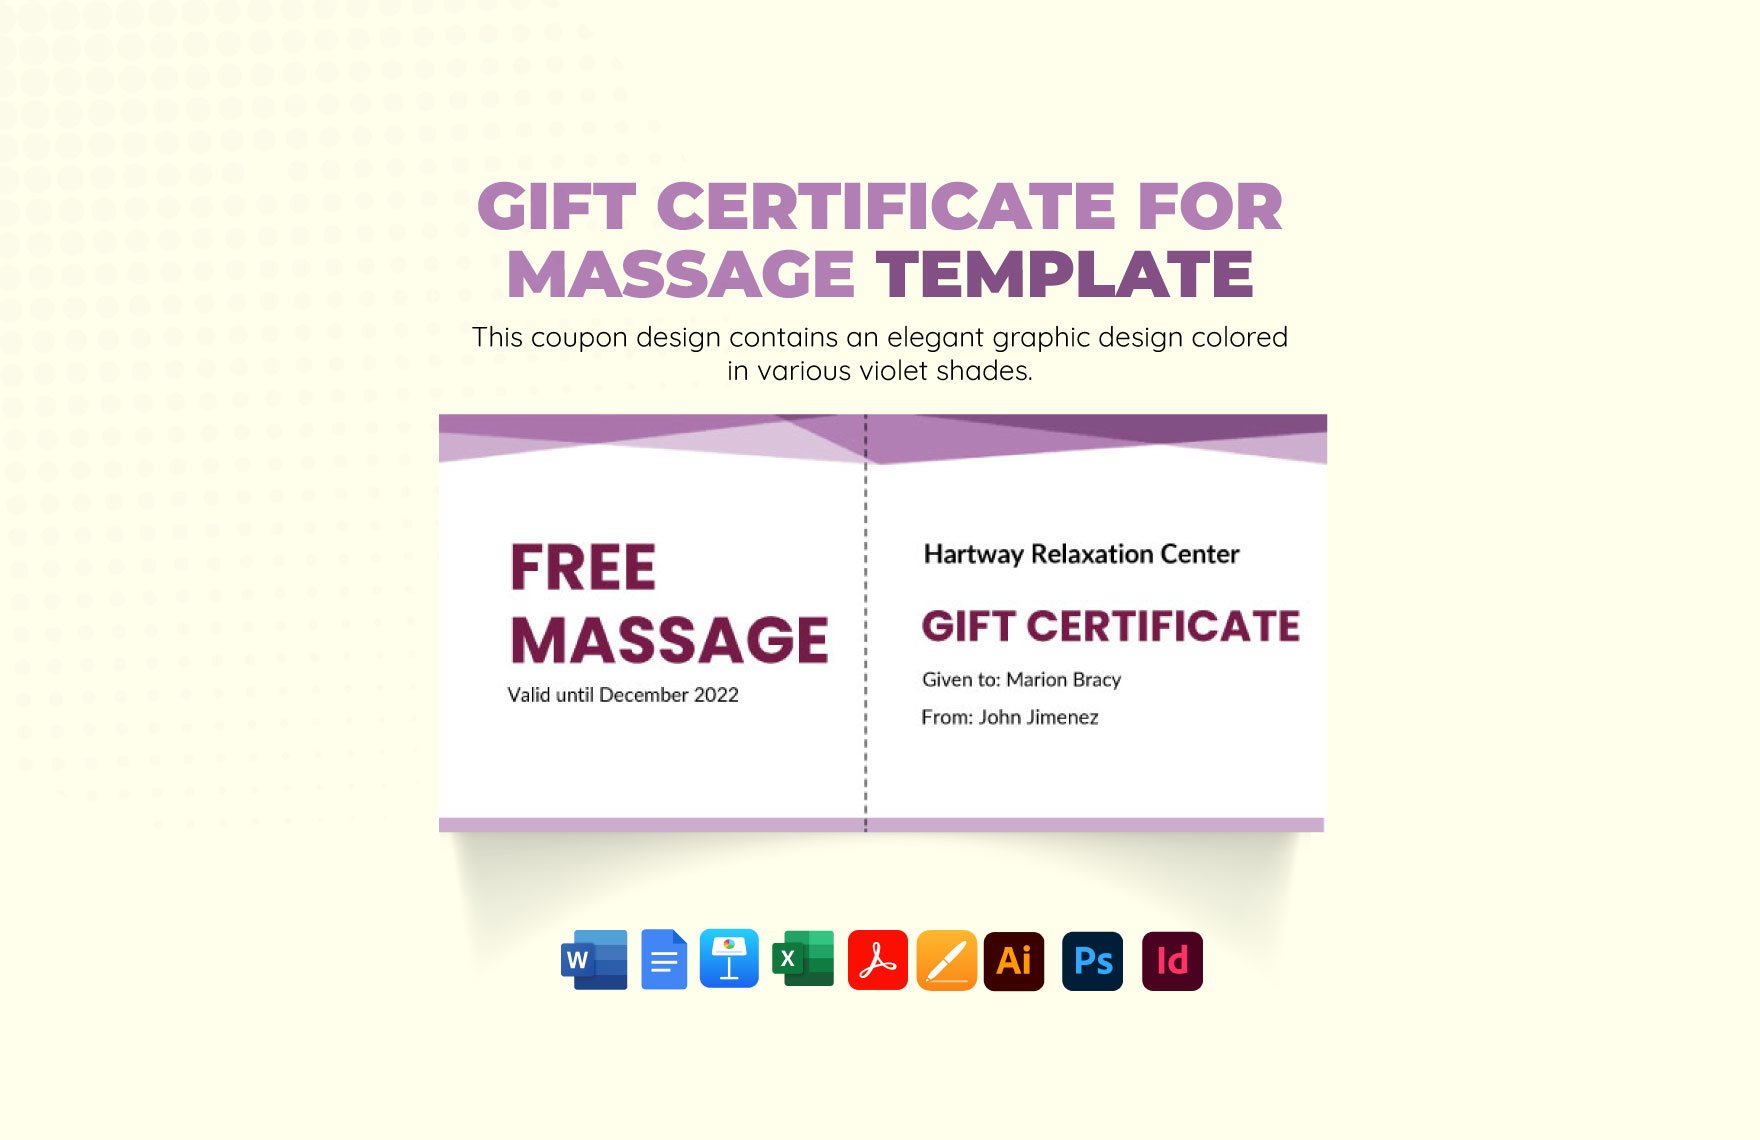 Gift Certificate for Massage Template in Word, Google Docs, Apple Pages, Publisher, InDesign